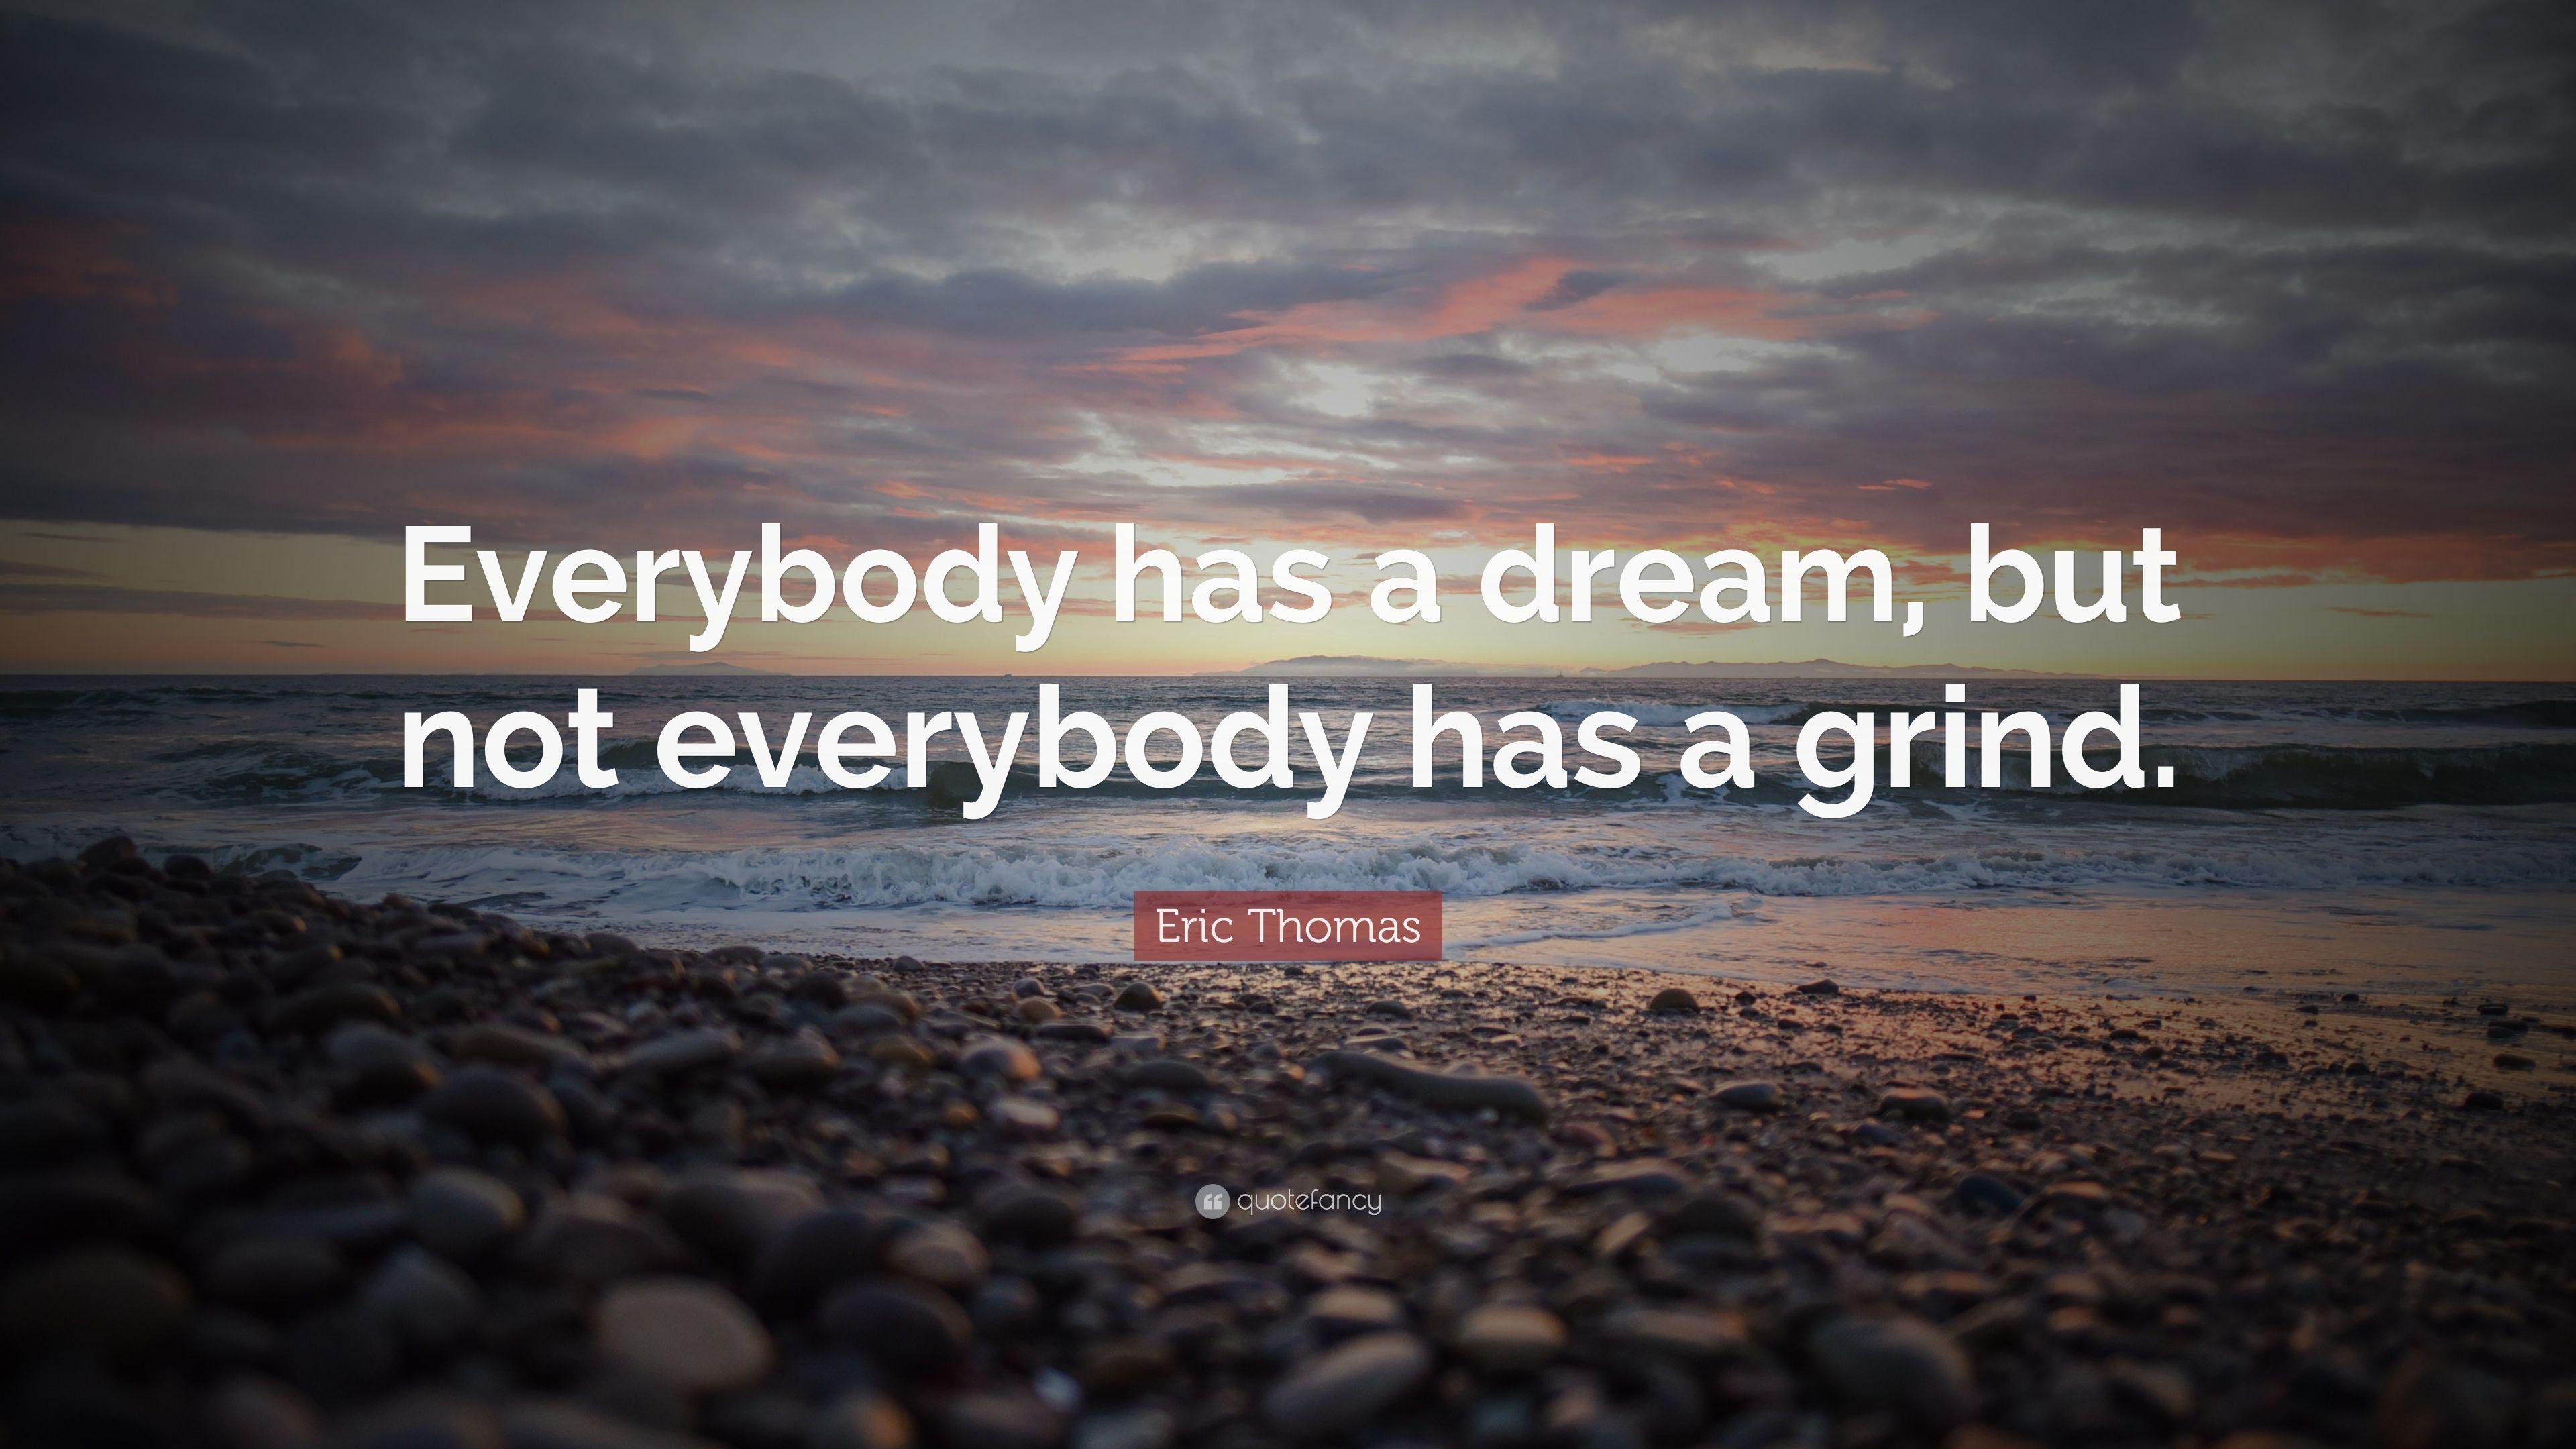 Eric Thomas Quote: “Everybody has a dream, but not everybody has a